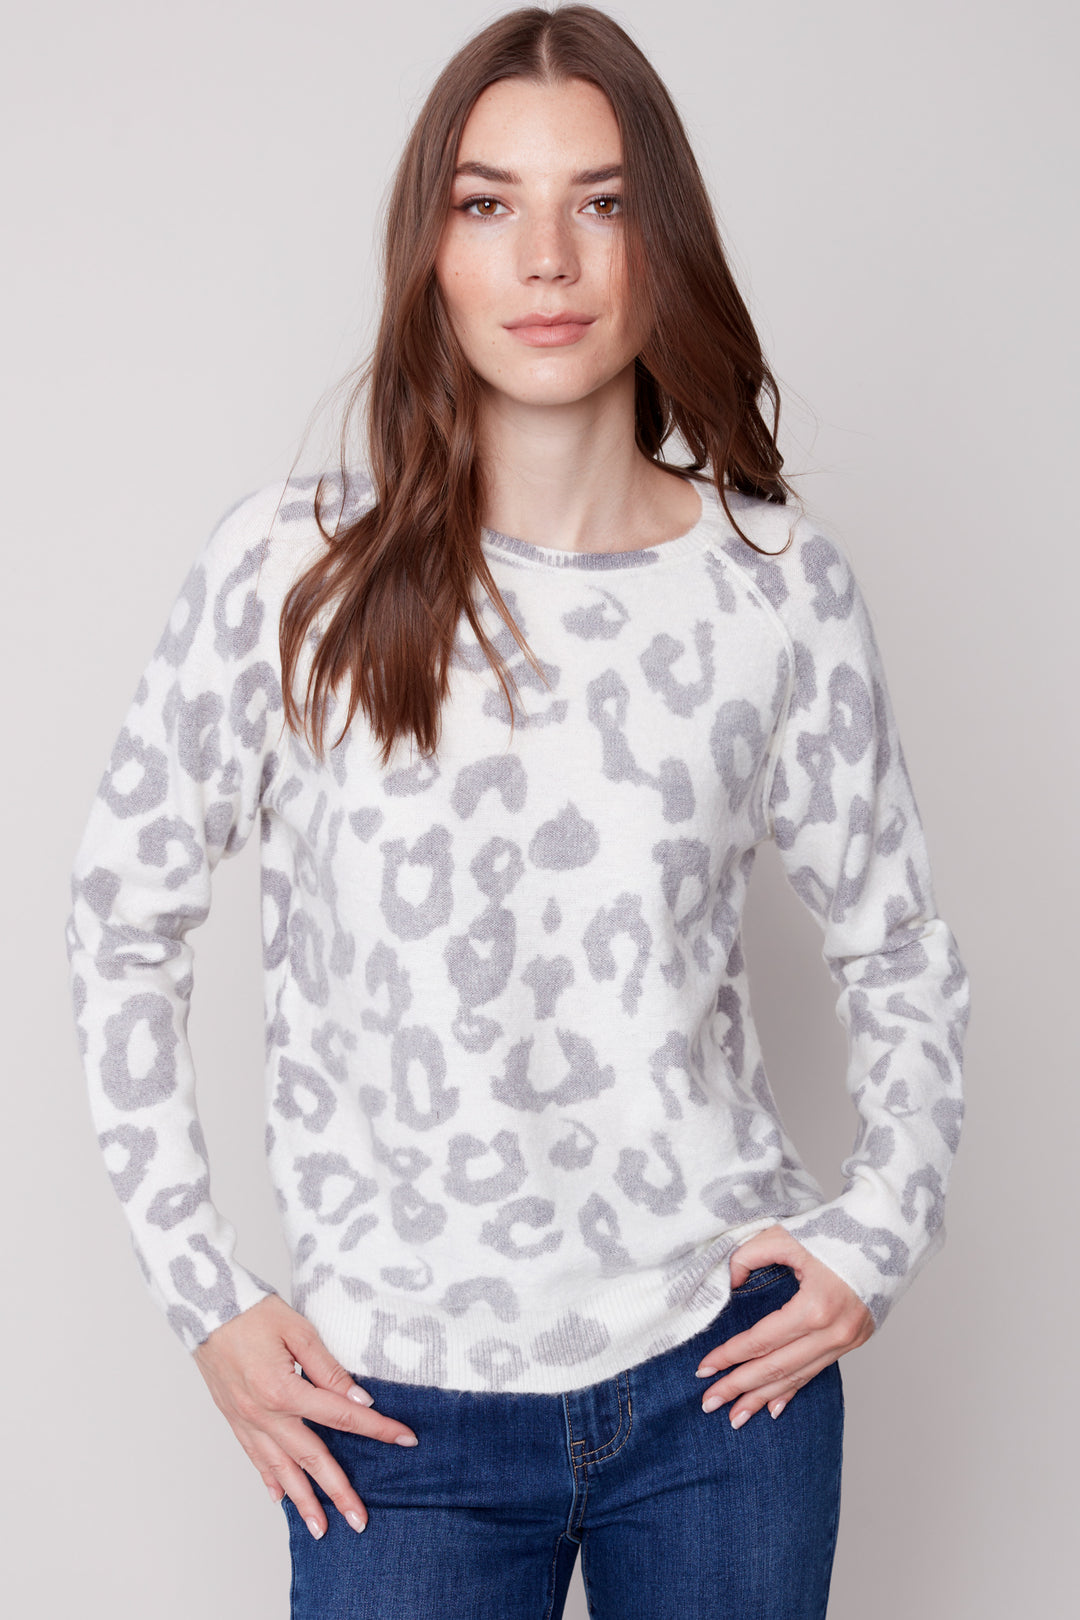 The printed crew neck sweater is designed with a crew-neck and raglan sleeve for a light, comfortable fit.